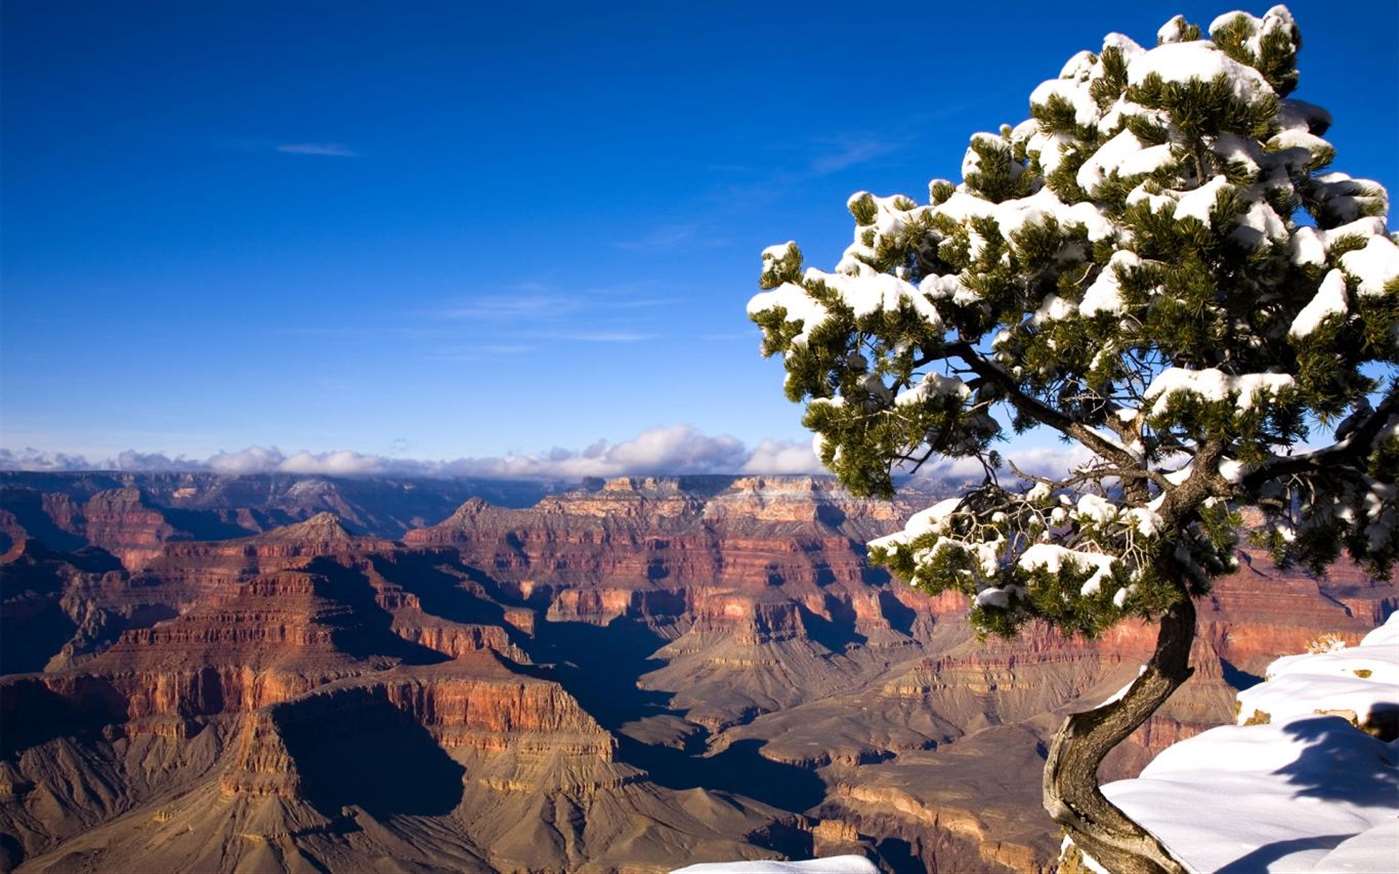 Microsoft release The Grand Canyon National Park Windows 10